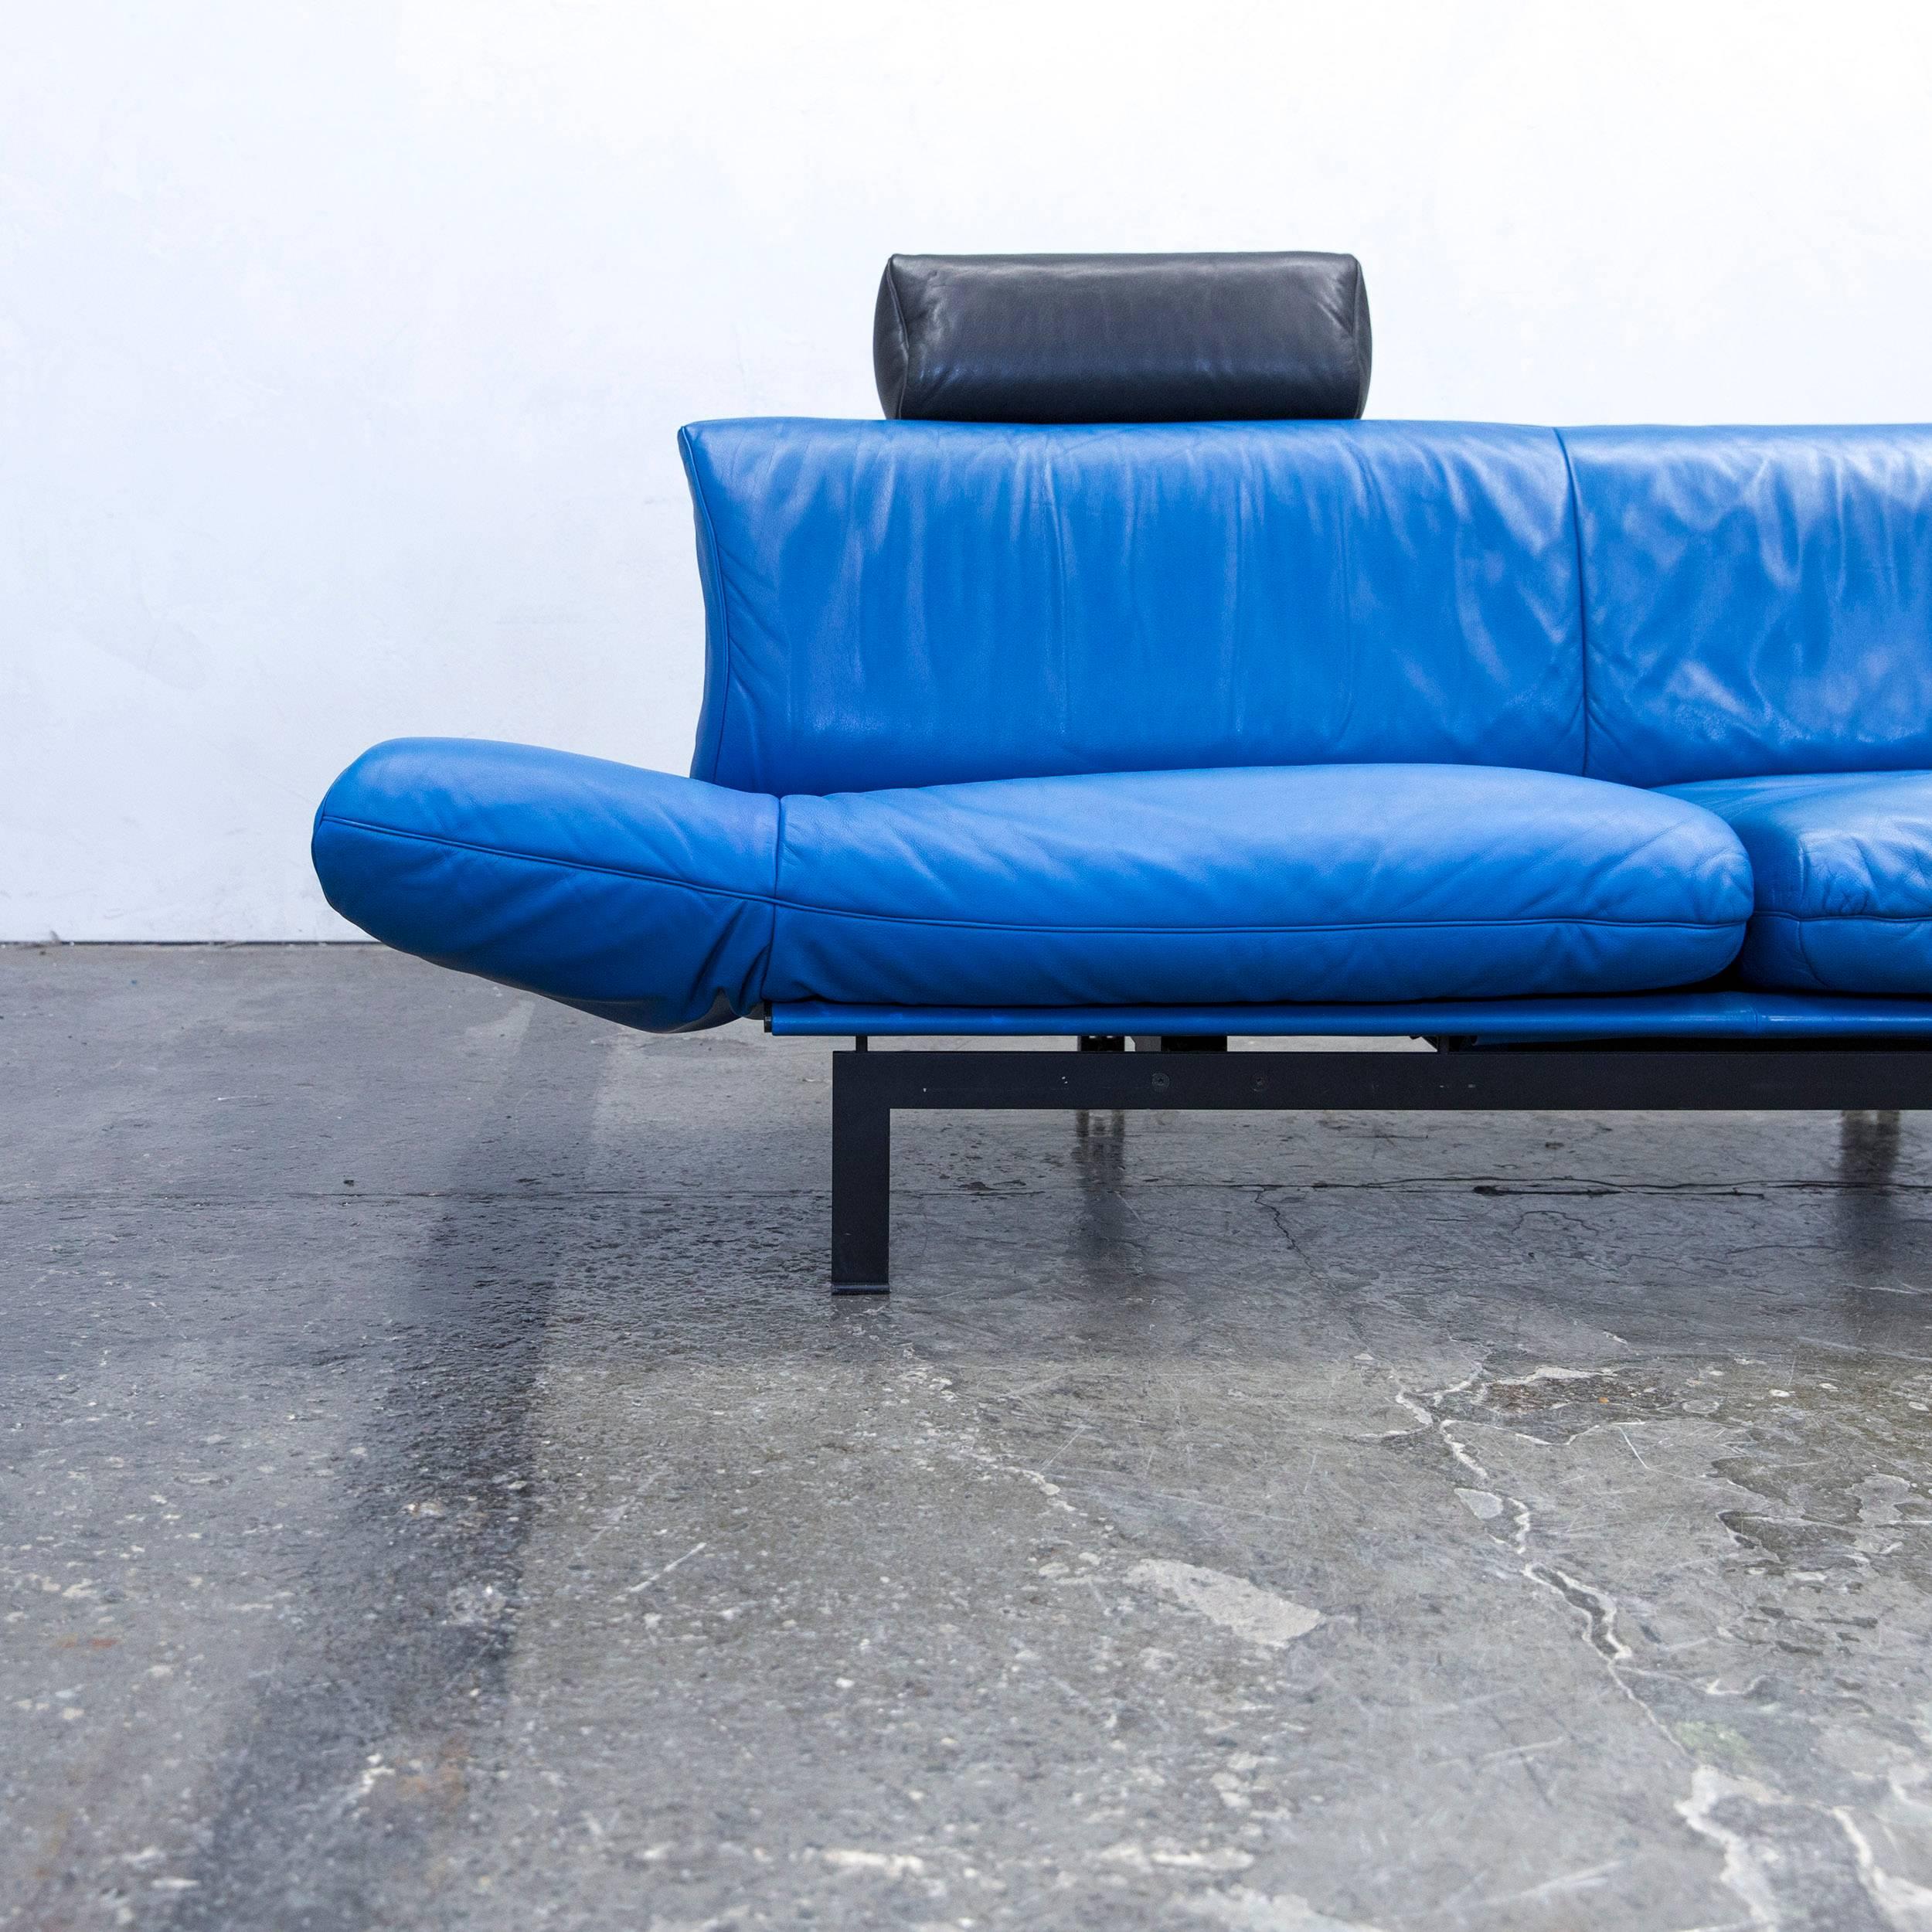 Blue and black colored original De Sede DS 140 Designer leather sofa, in a minimalistic and modern design, with convenient functions, made for pure comfort and flexibility.